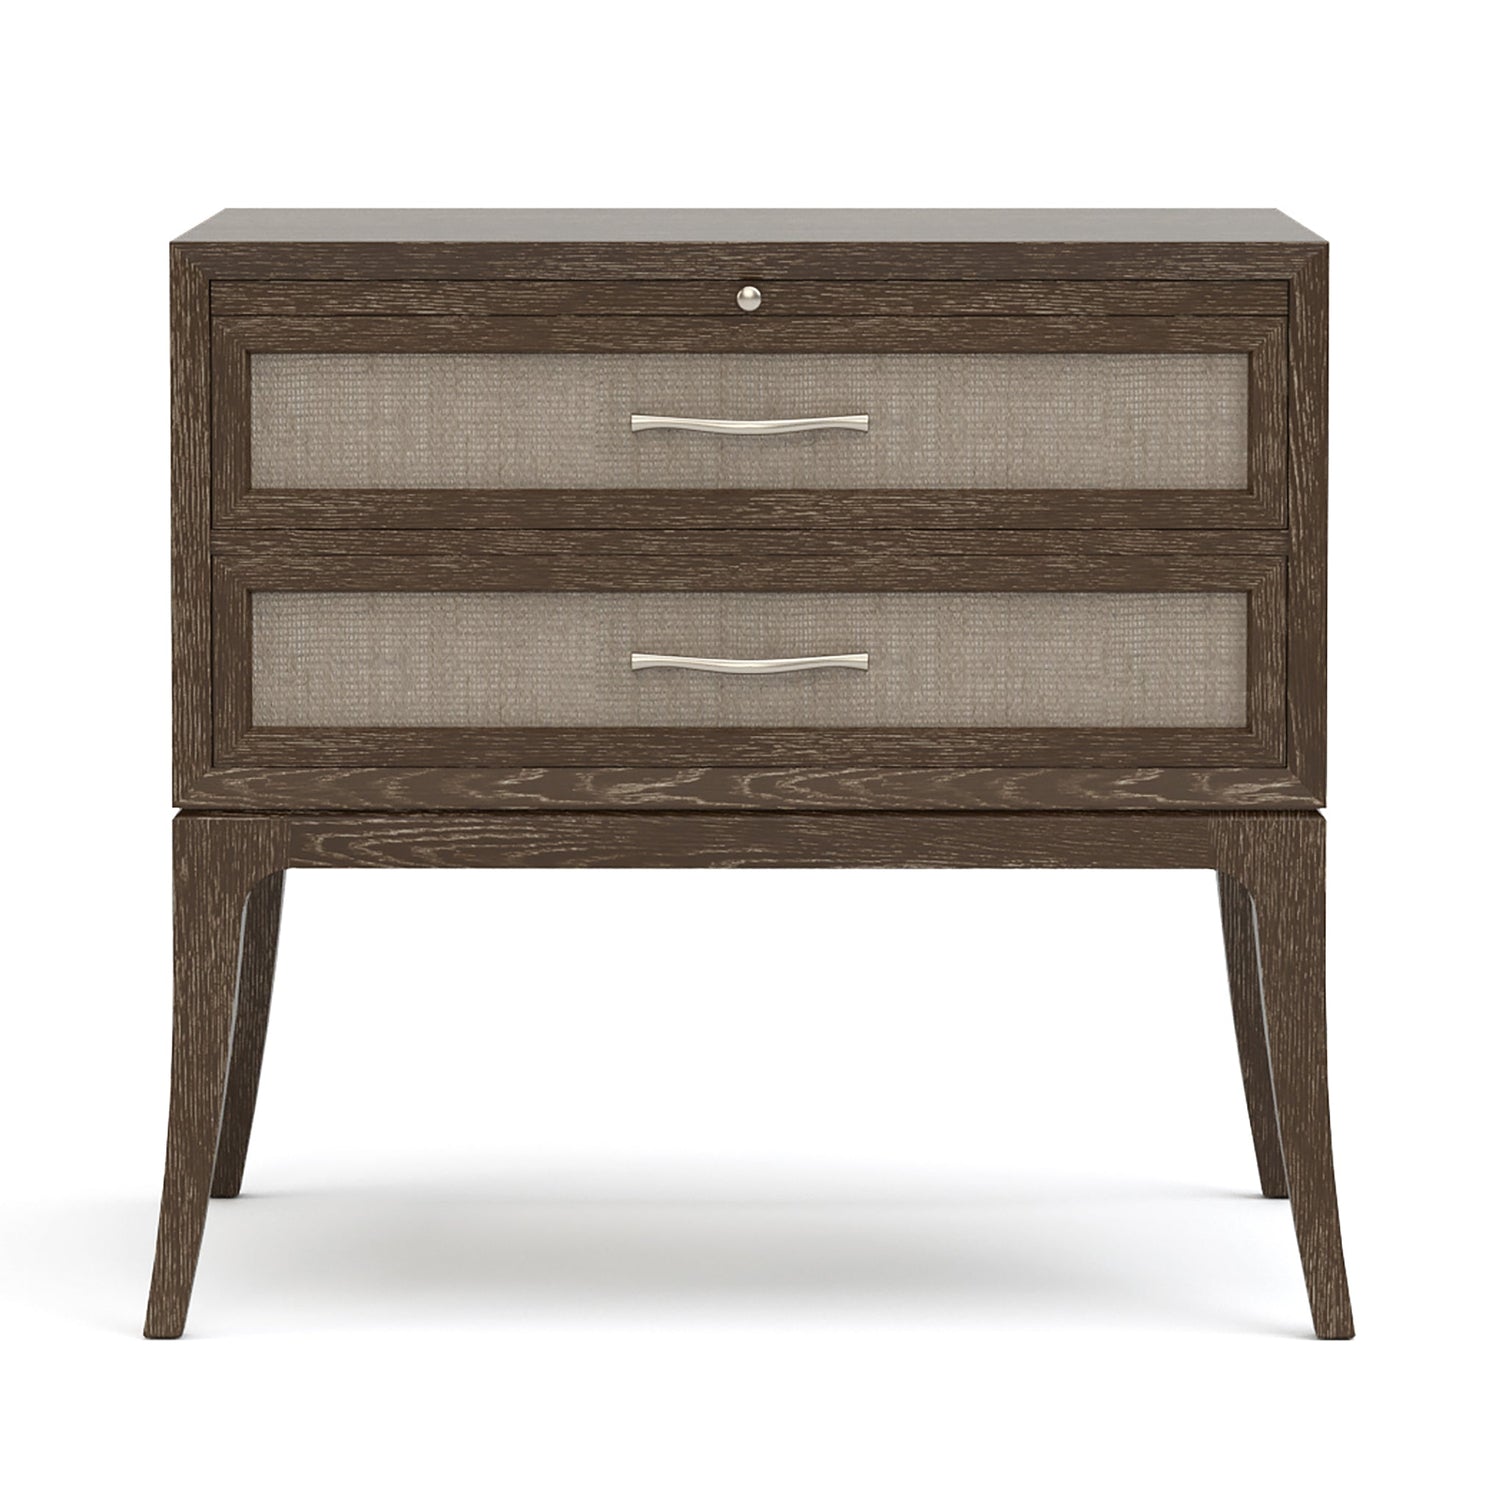 Maidstone Nightstand with Woven Jute in 202 Pier finish